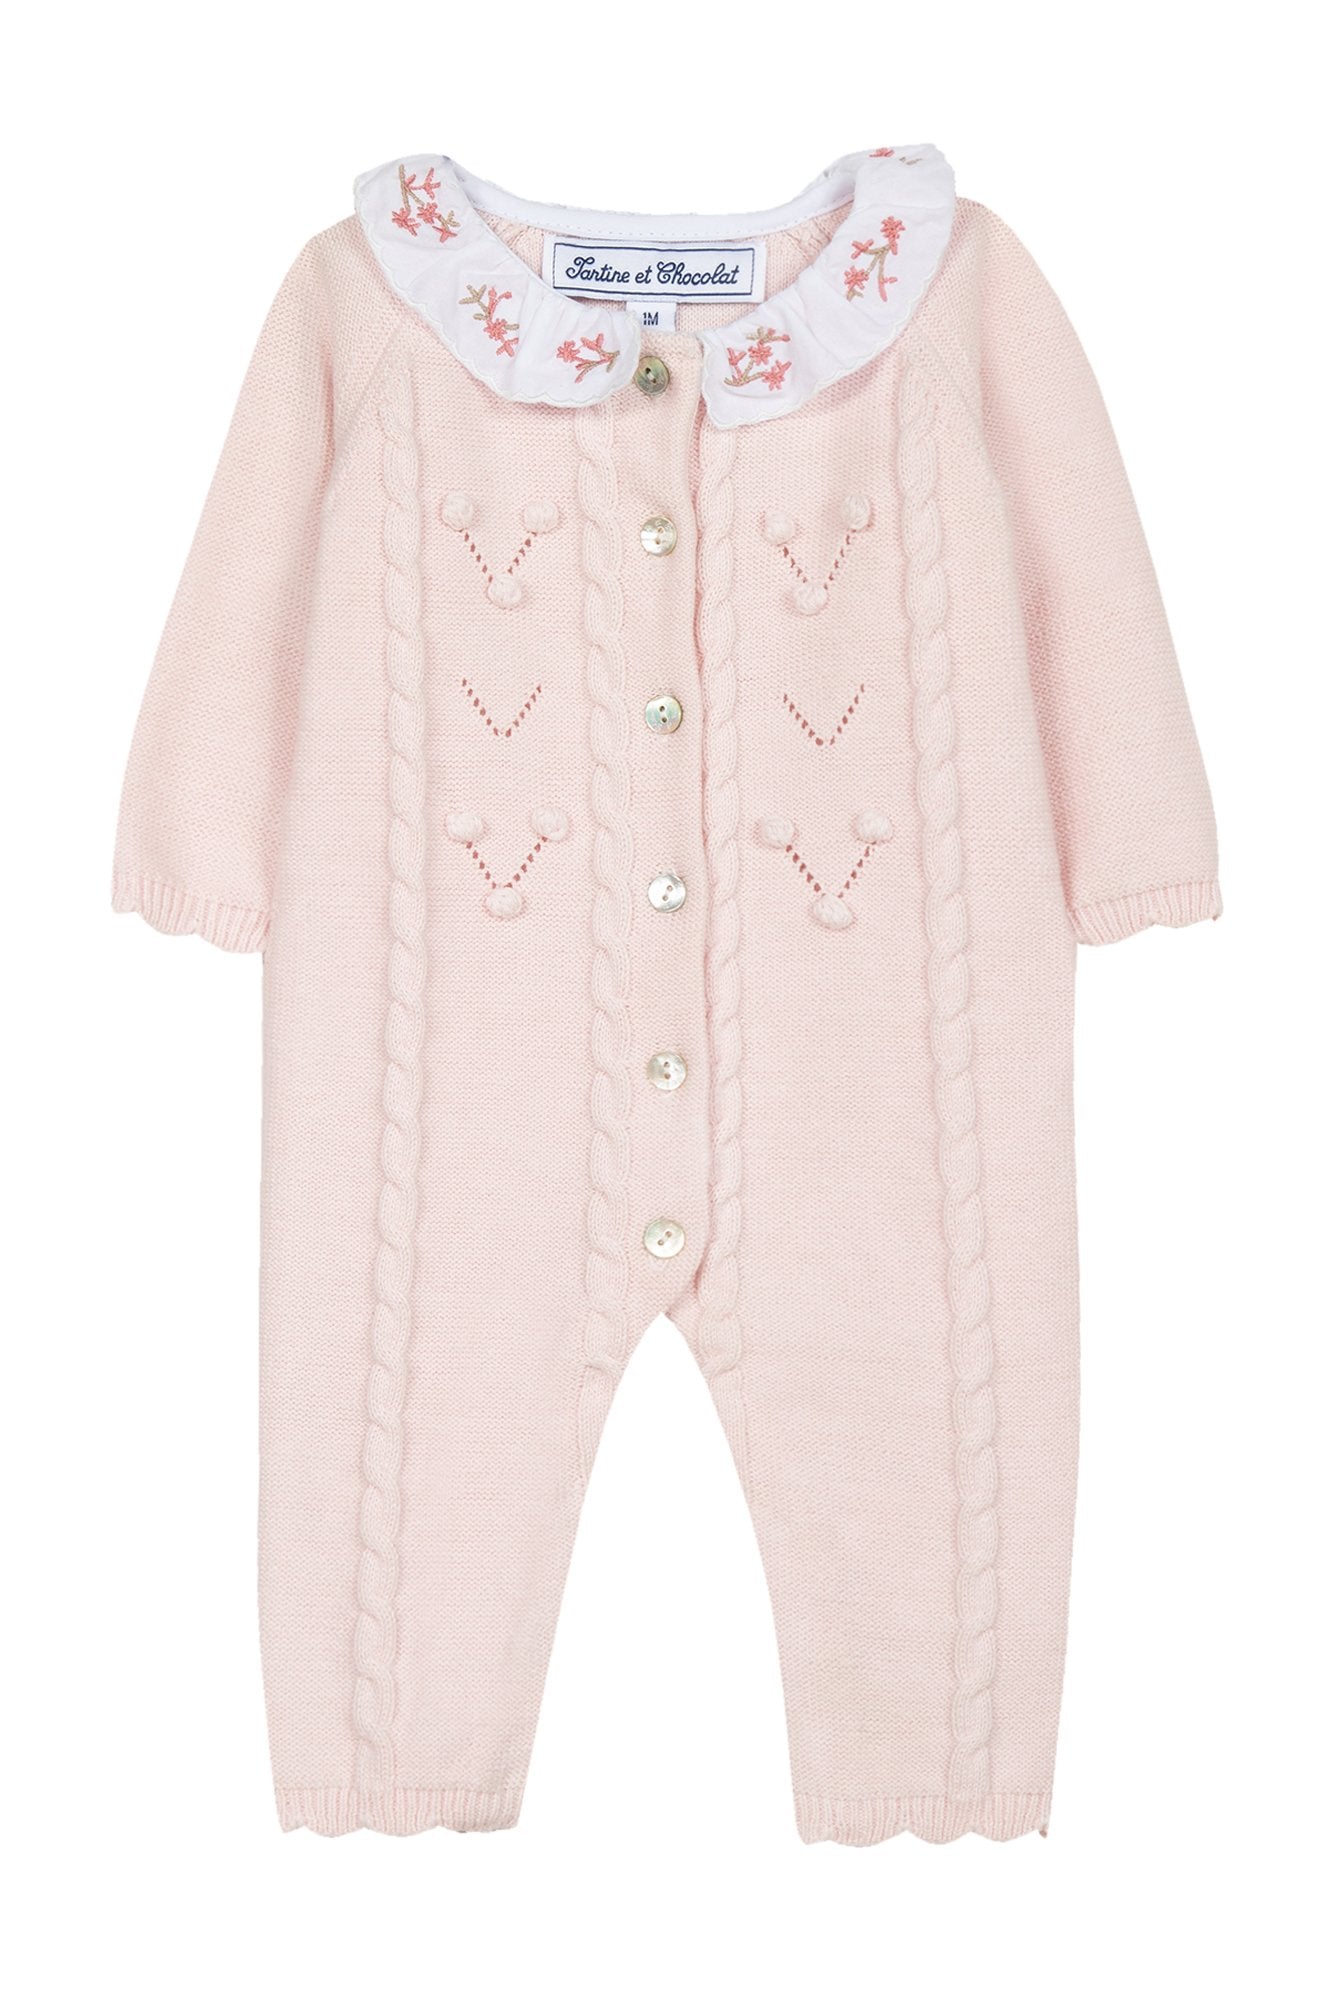 Long-sleeved romper suit - Pale pink with embroidery - Tartine Et Chocolat